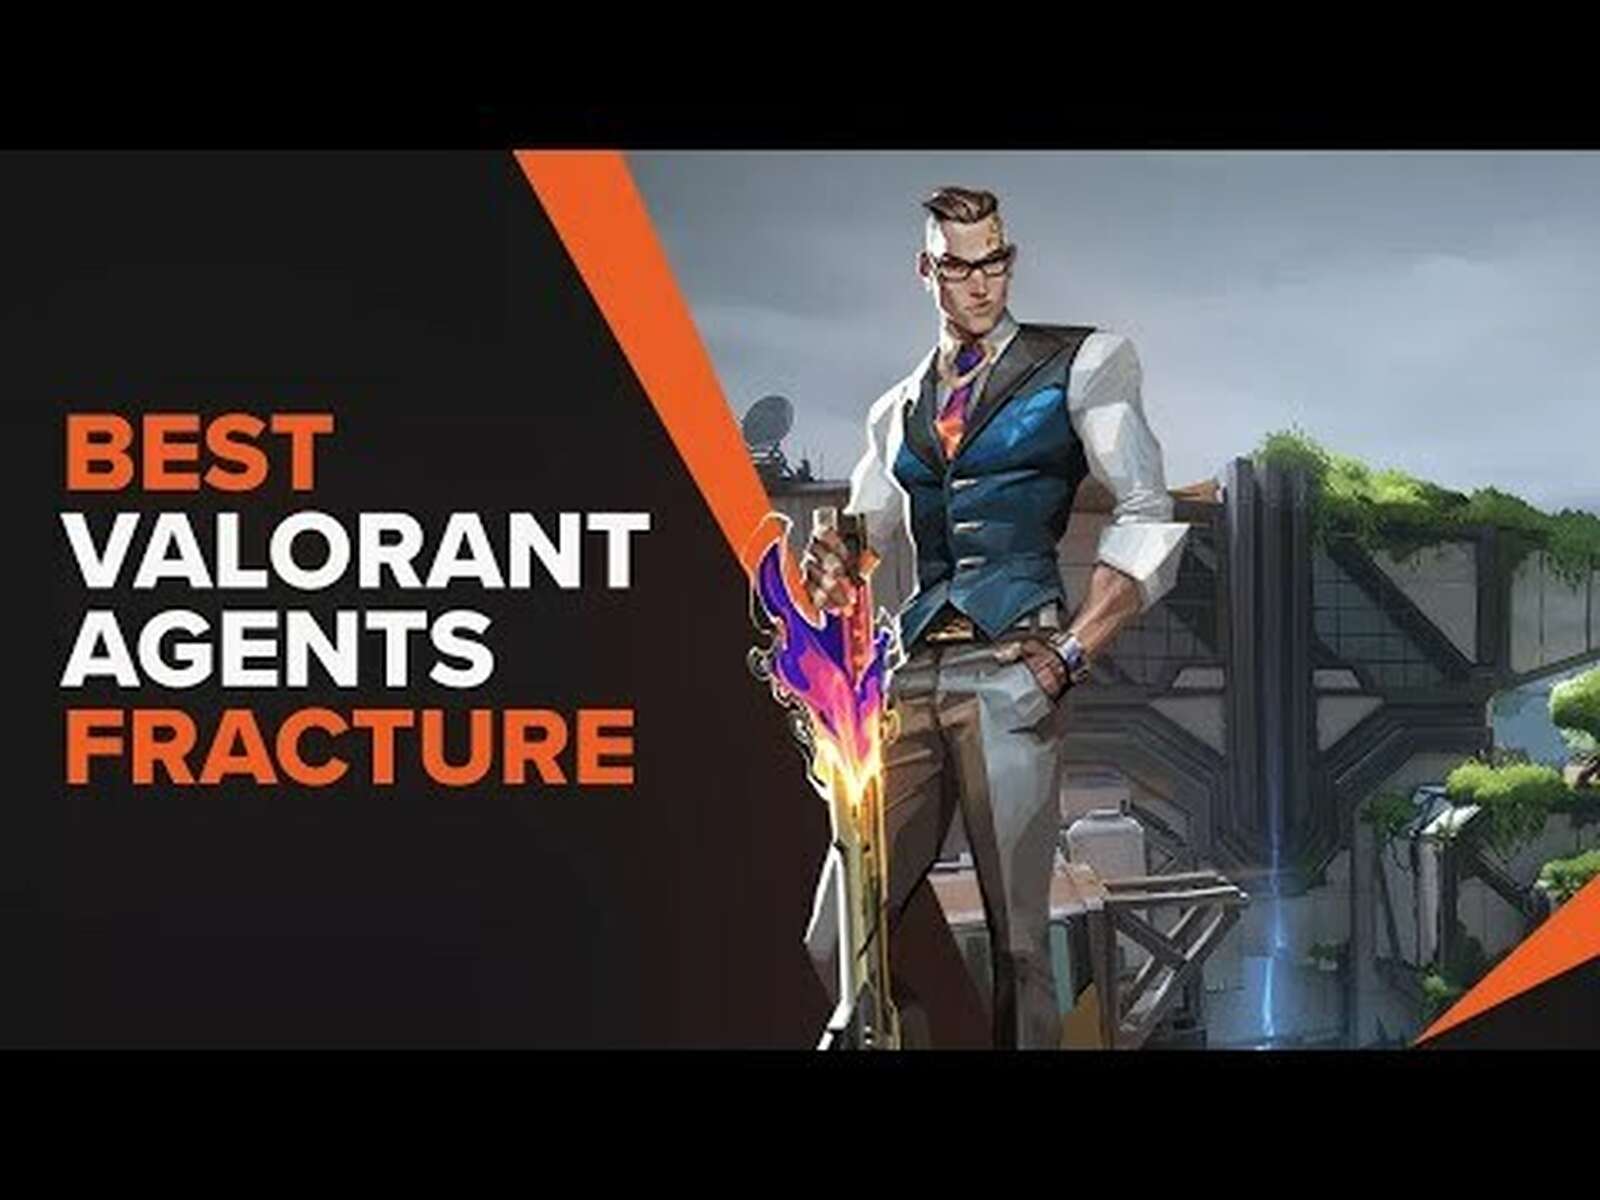 The 5 Absolute BEST Valorant Agents on Fracture